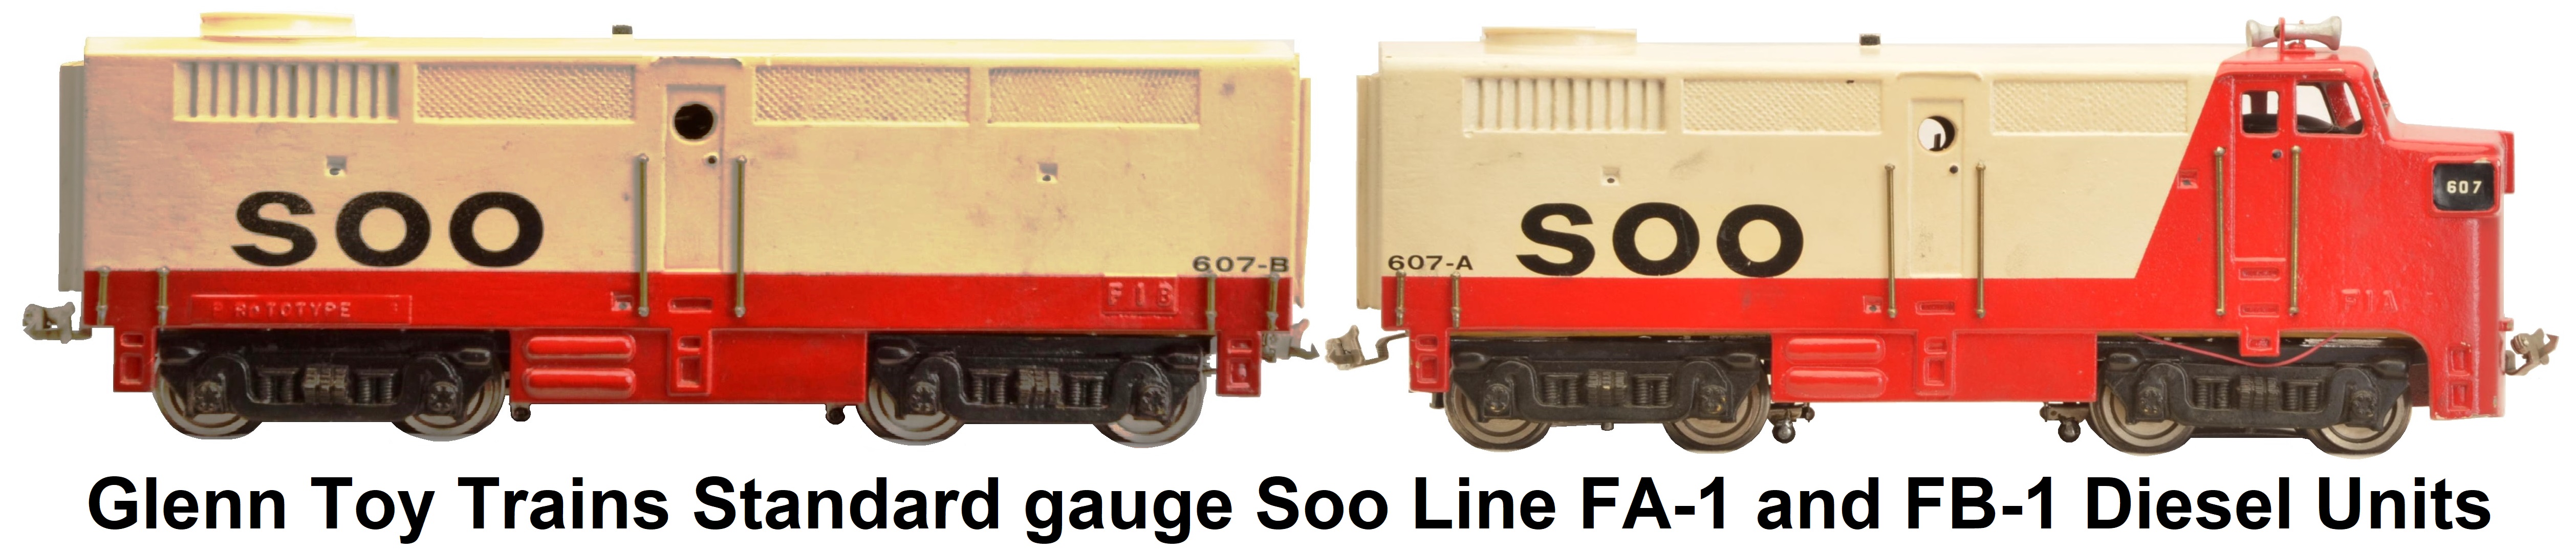 Glenn Toy Trains Standard gauge White and Red Soo FA-1 and FB-1 Diesel Units